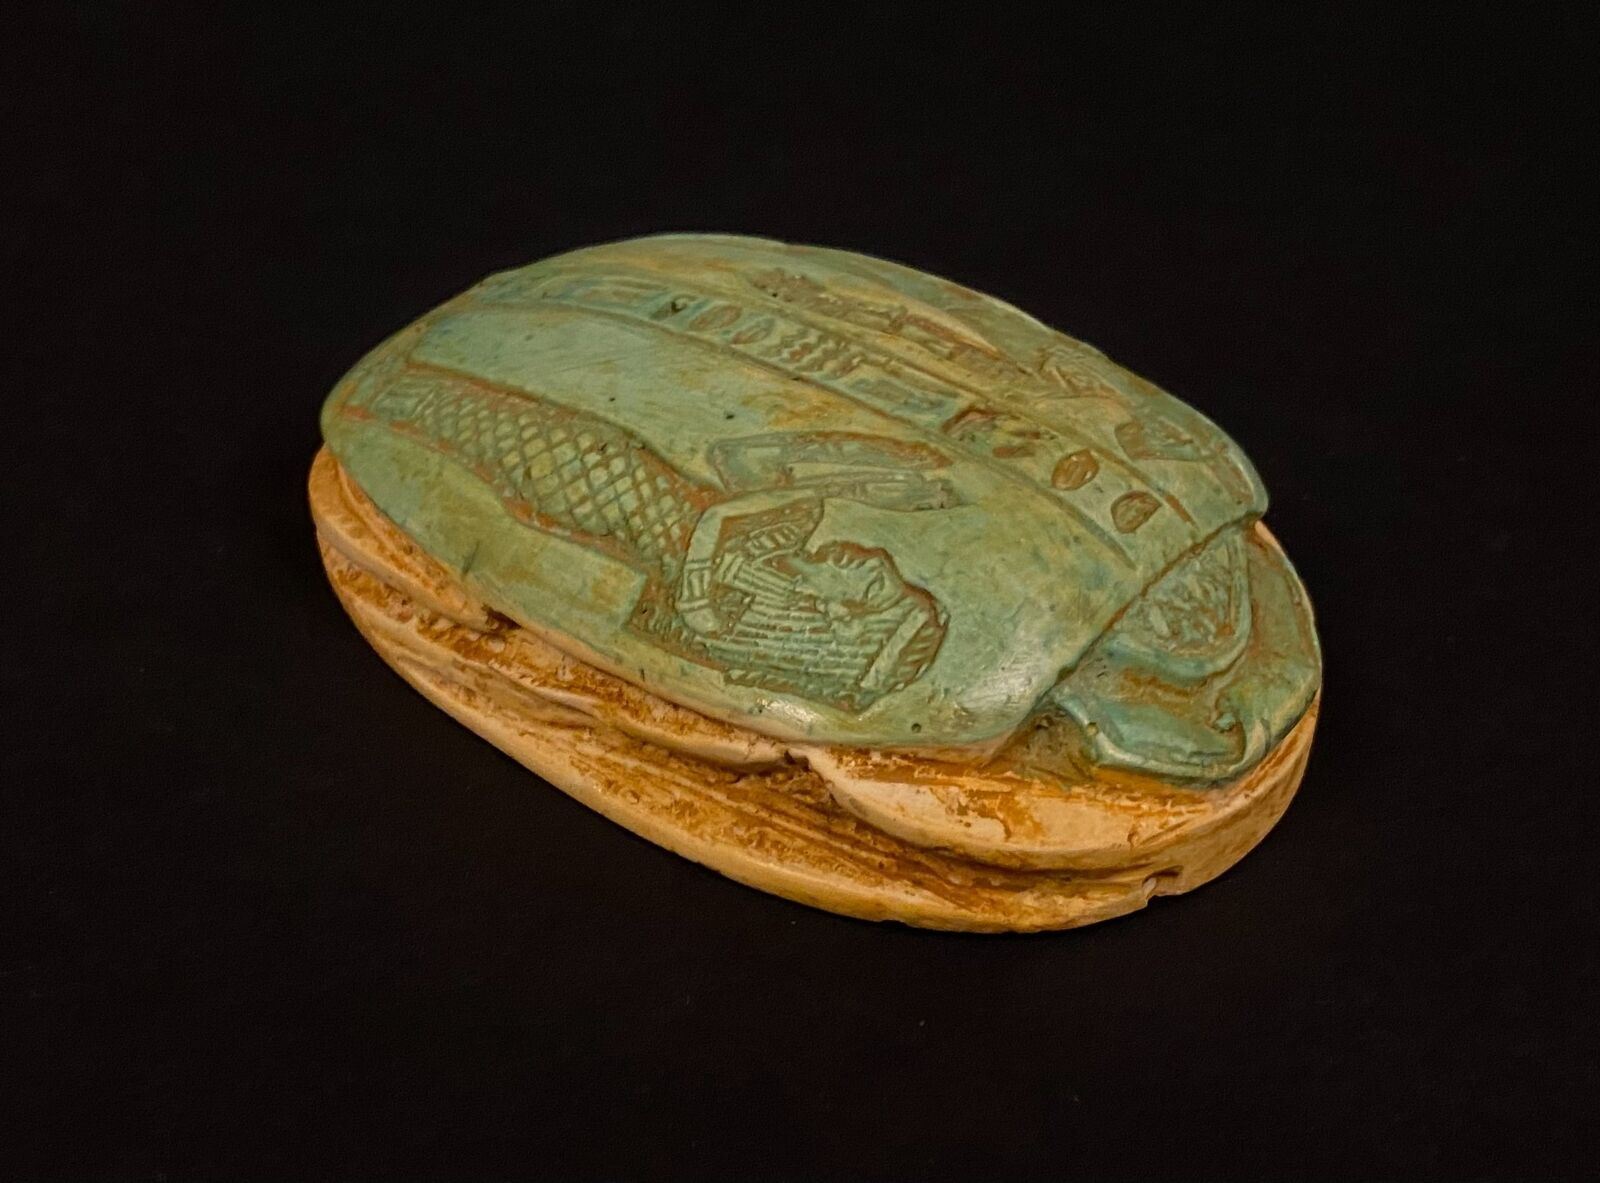 Superb Huge Faience Scarab Beetle Statue With Anubis And Isis On Top  SALE